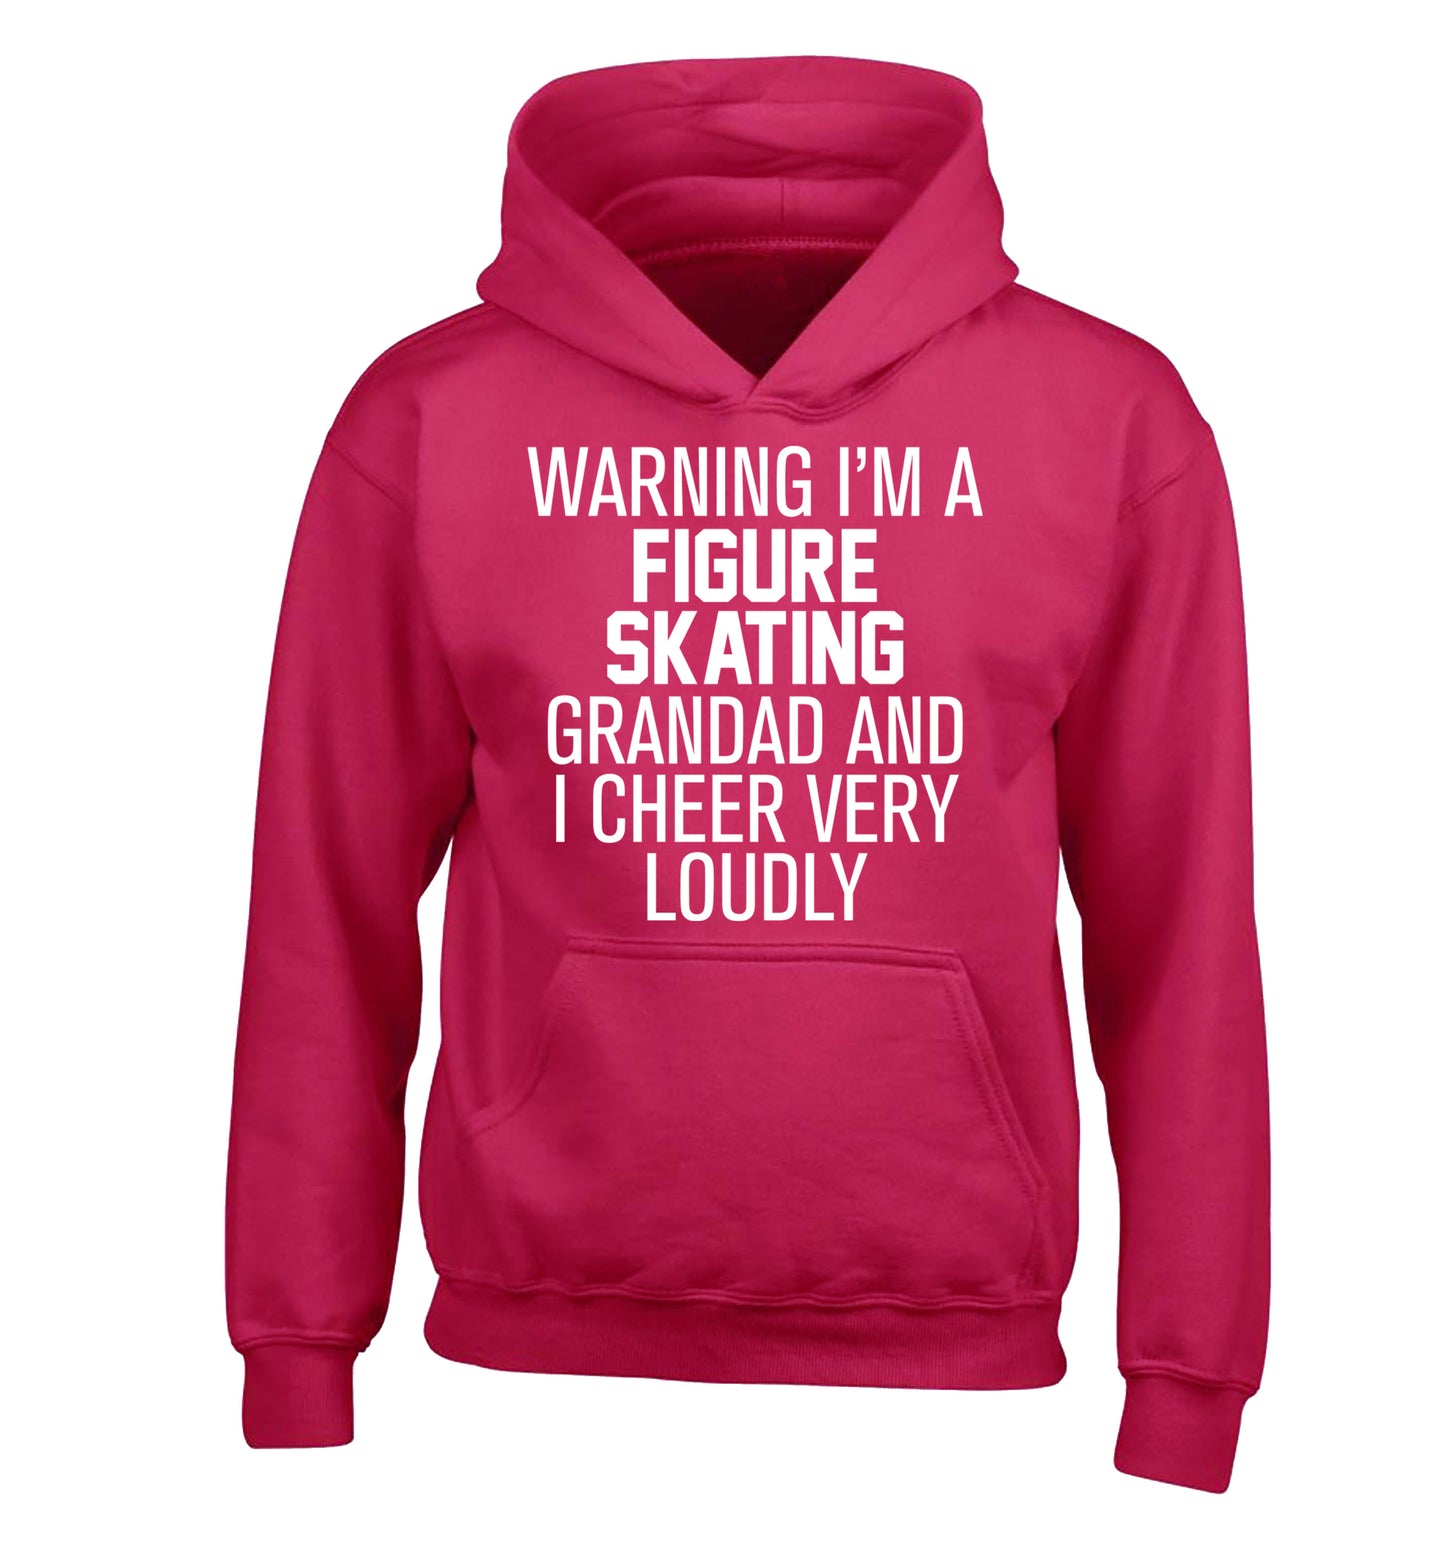 Warning I'm a figure skating grandad and I cheer very loudly children's pink hoodie 12-14 Years